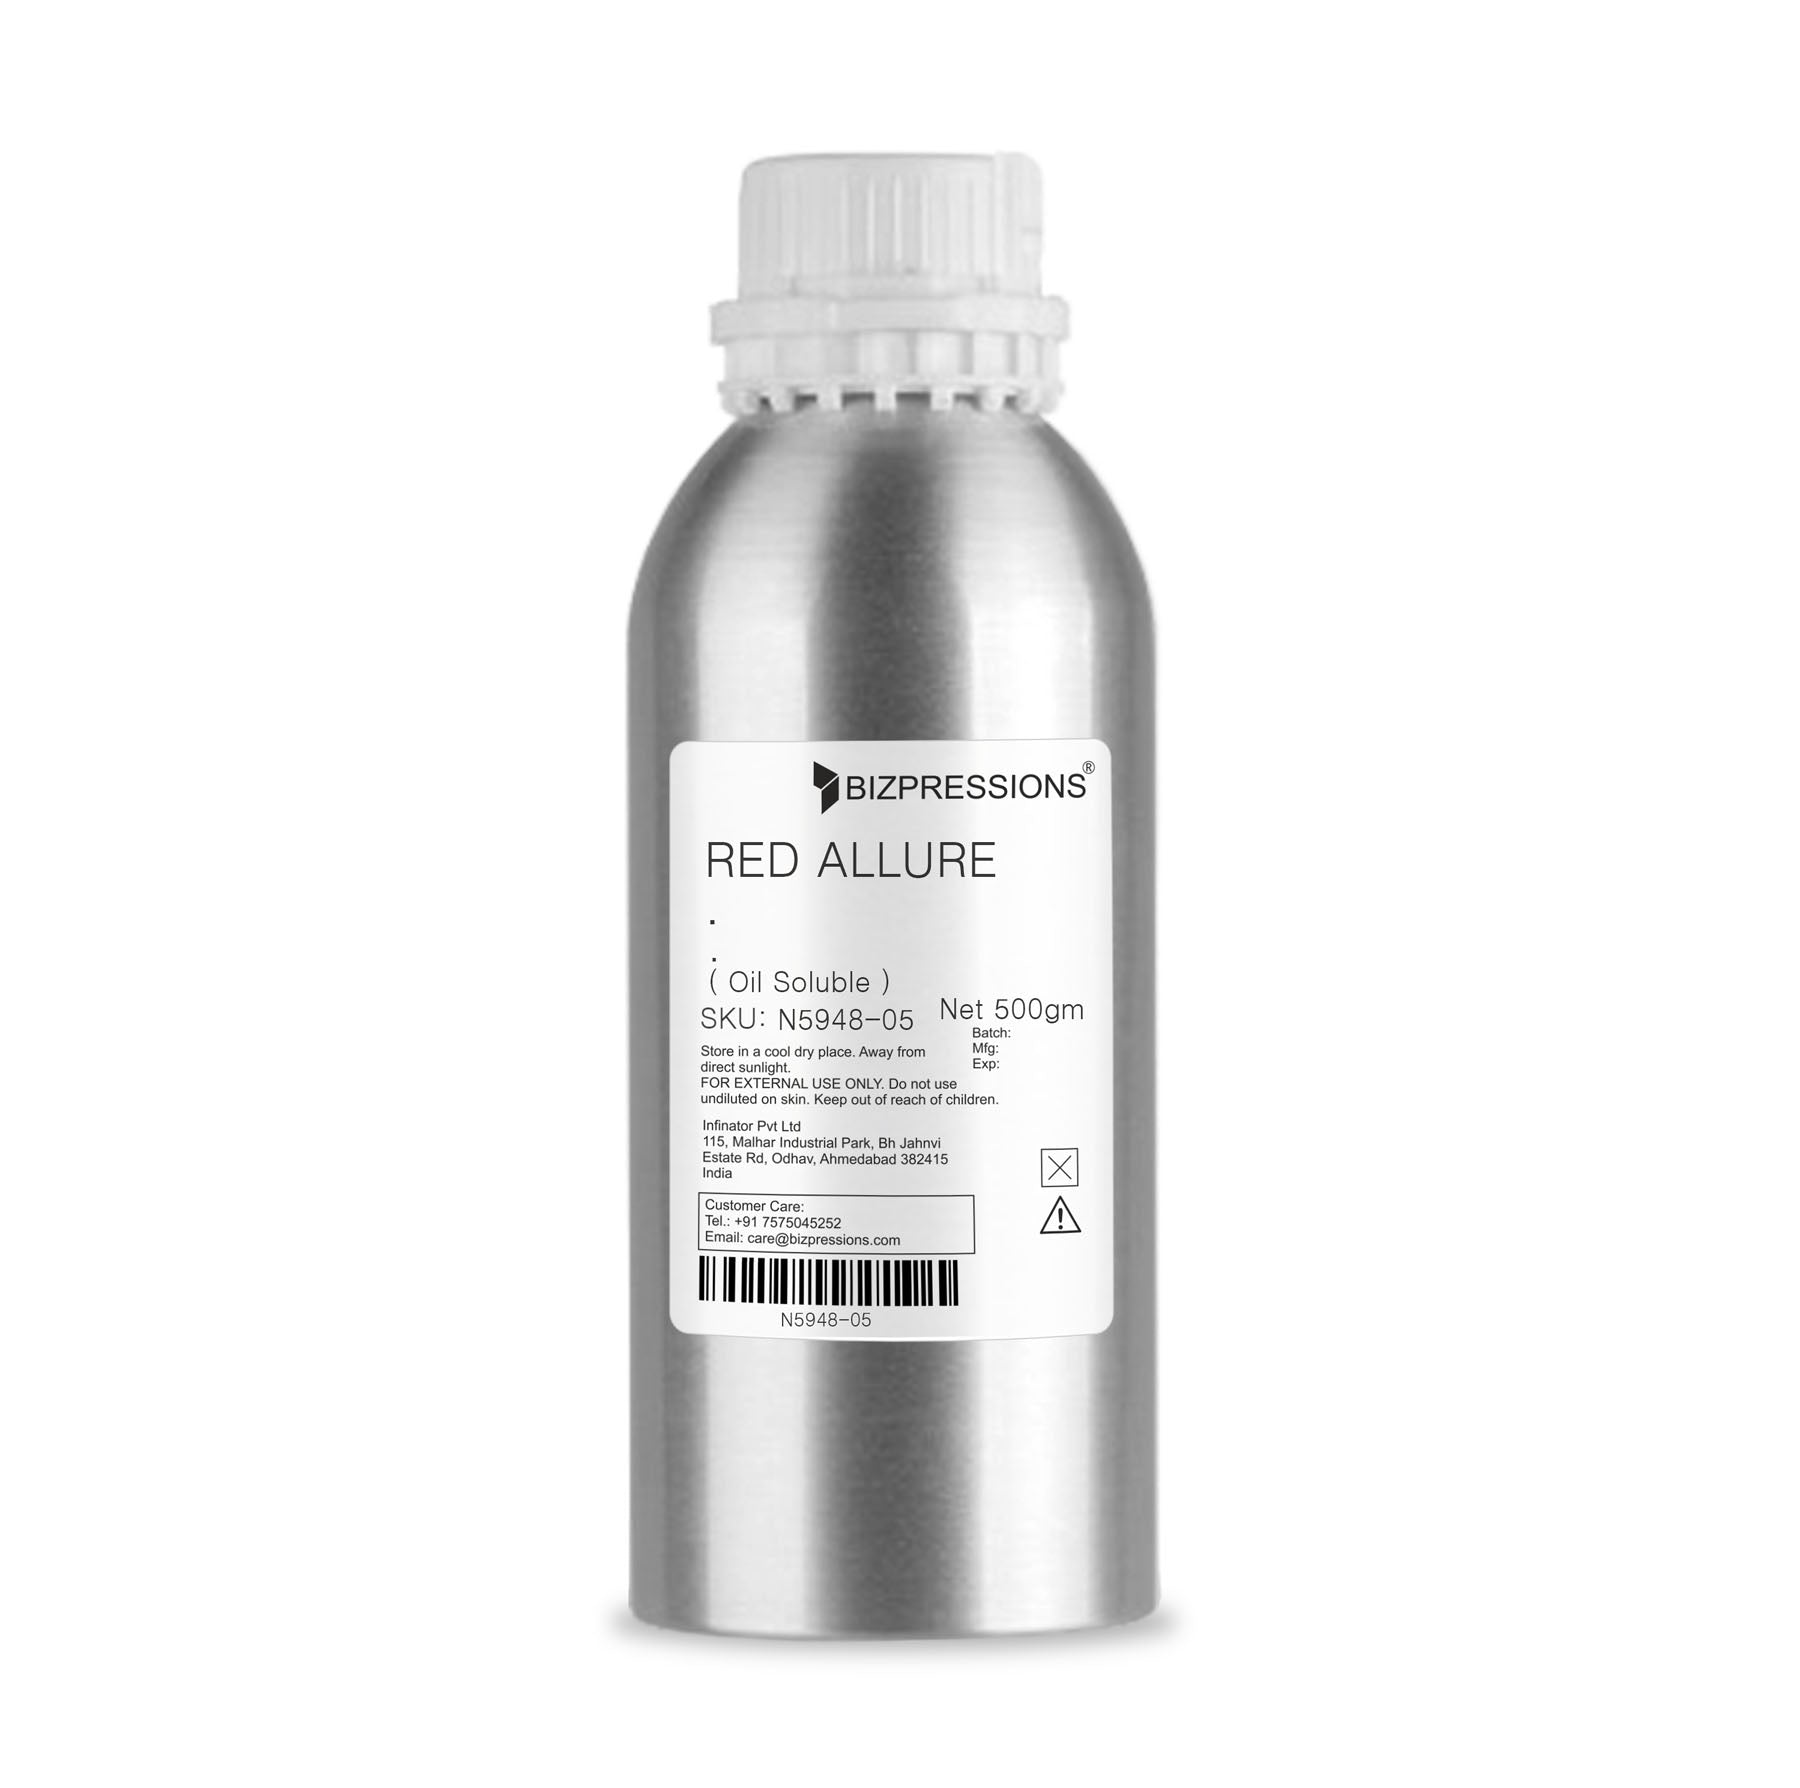 RED ALLURE - Fragrance ( Oil Soluble ) - 500 gm